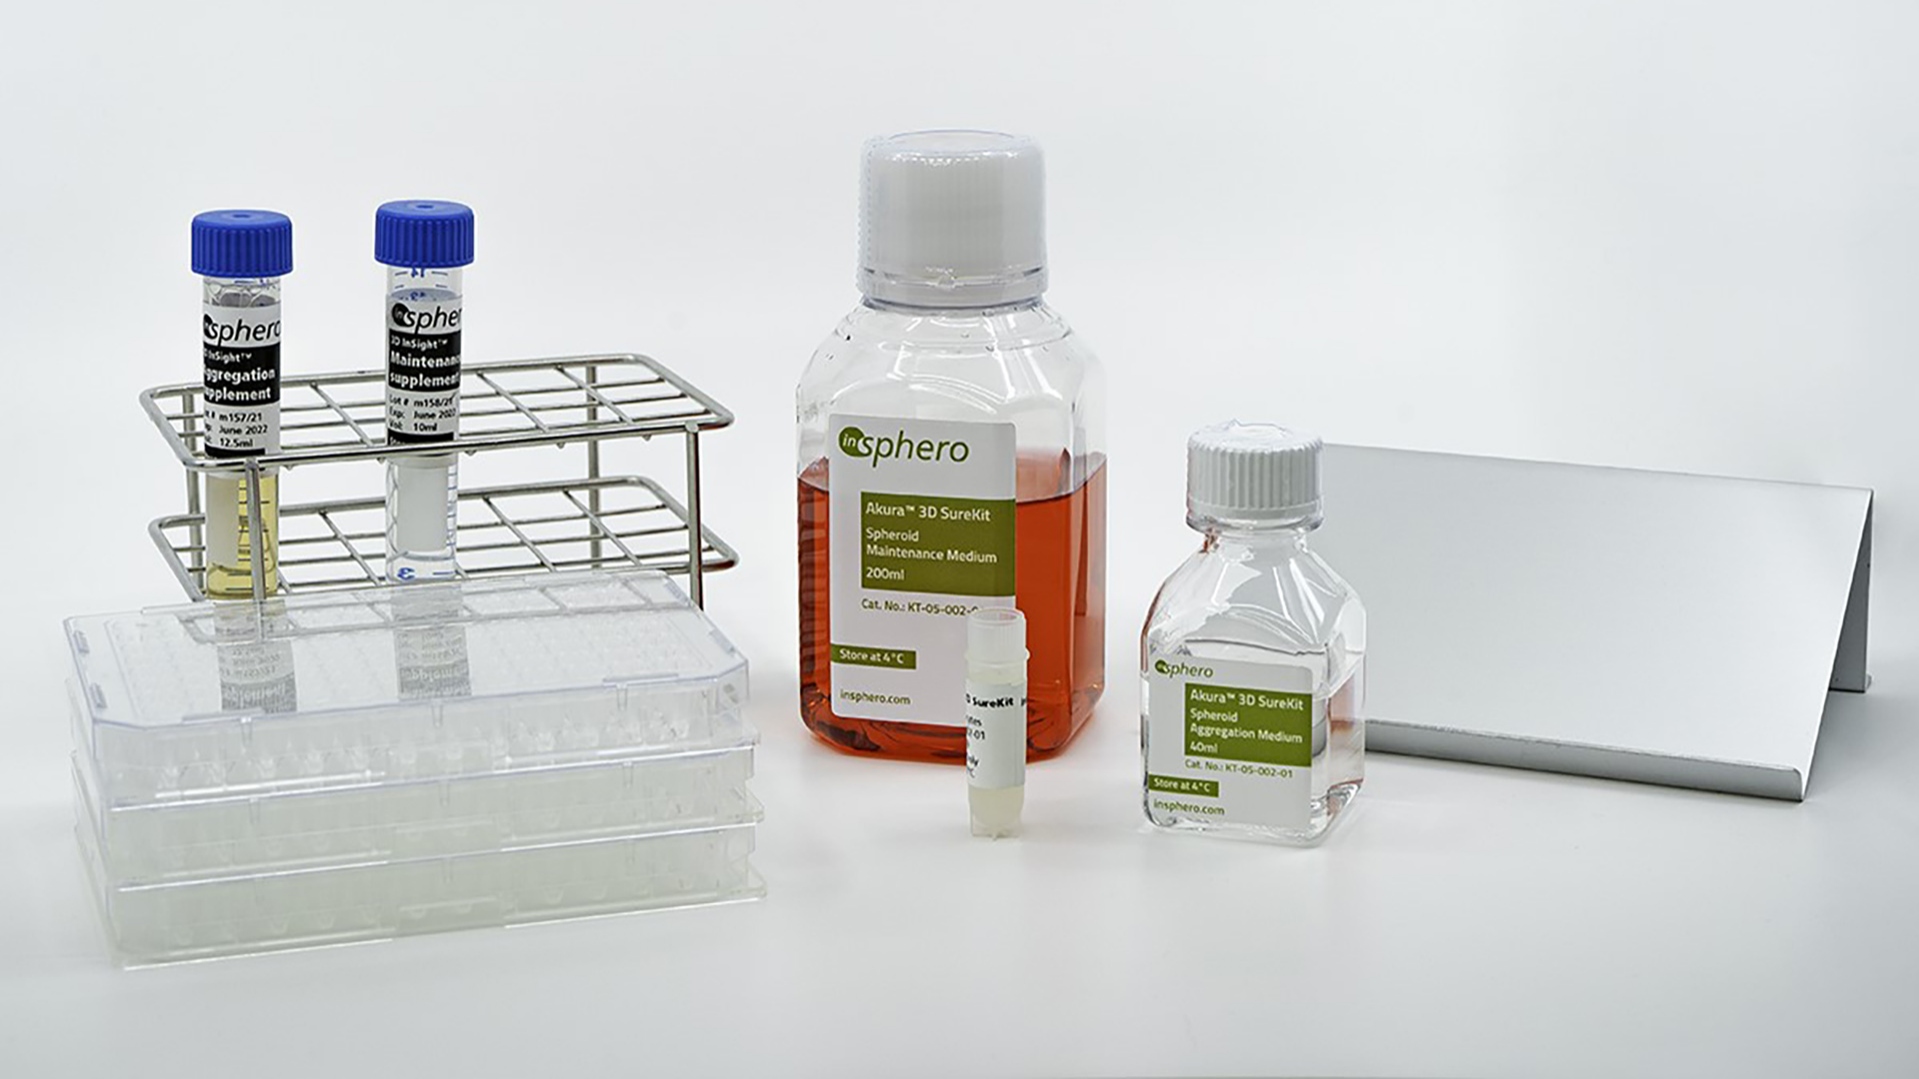 ZEISS Ventures invests in life science start-up InSphero to drive 3D cell culture research.